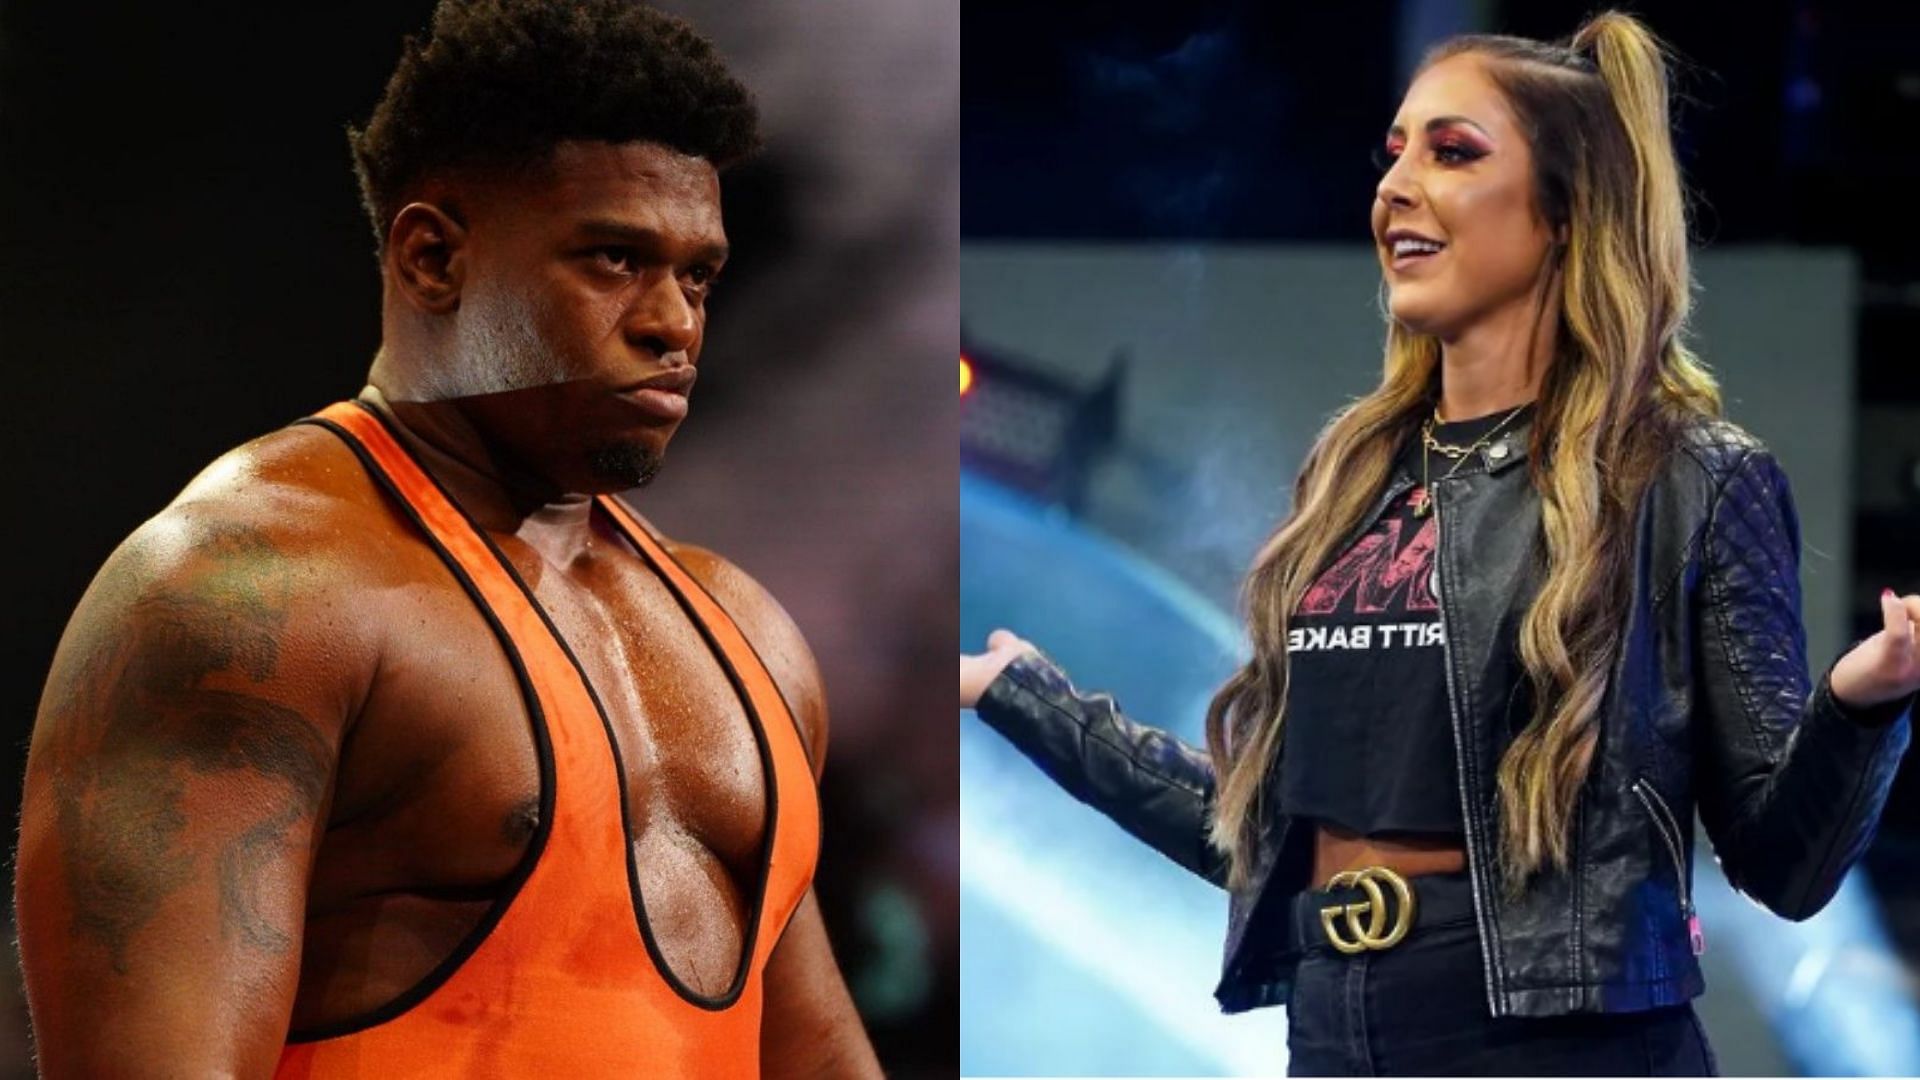 These AEW stars once tried out for WWE